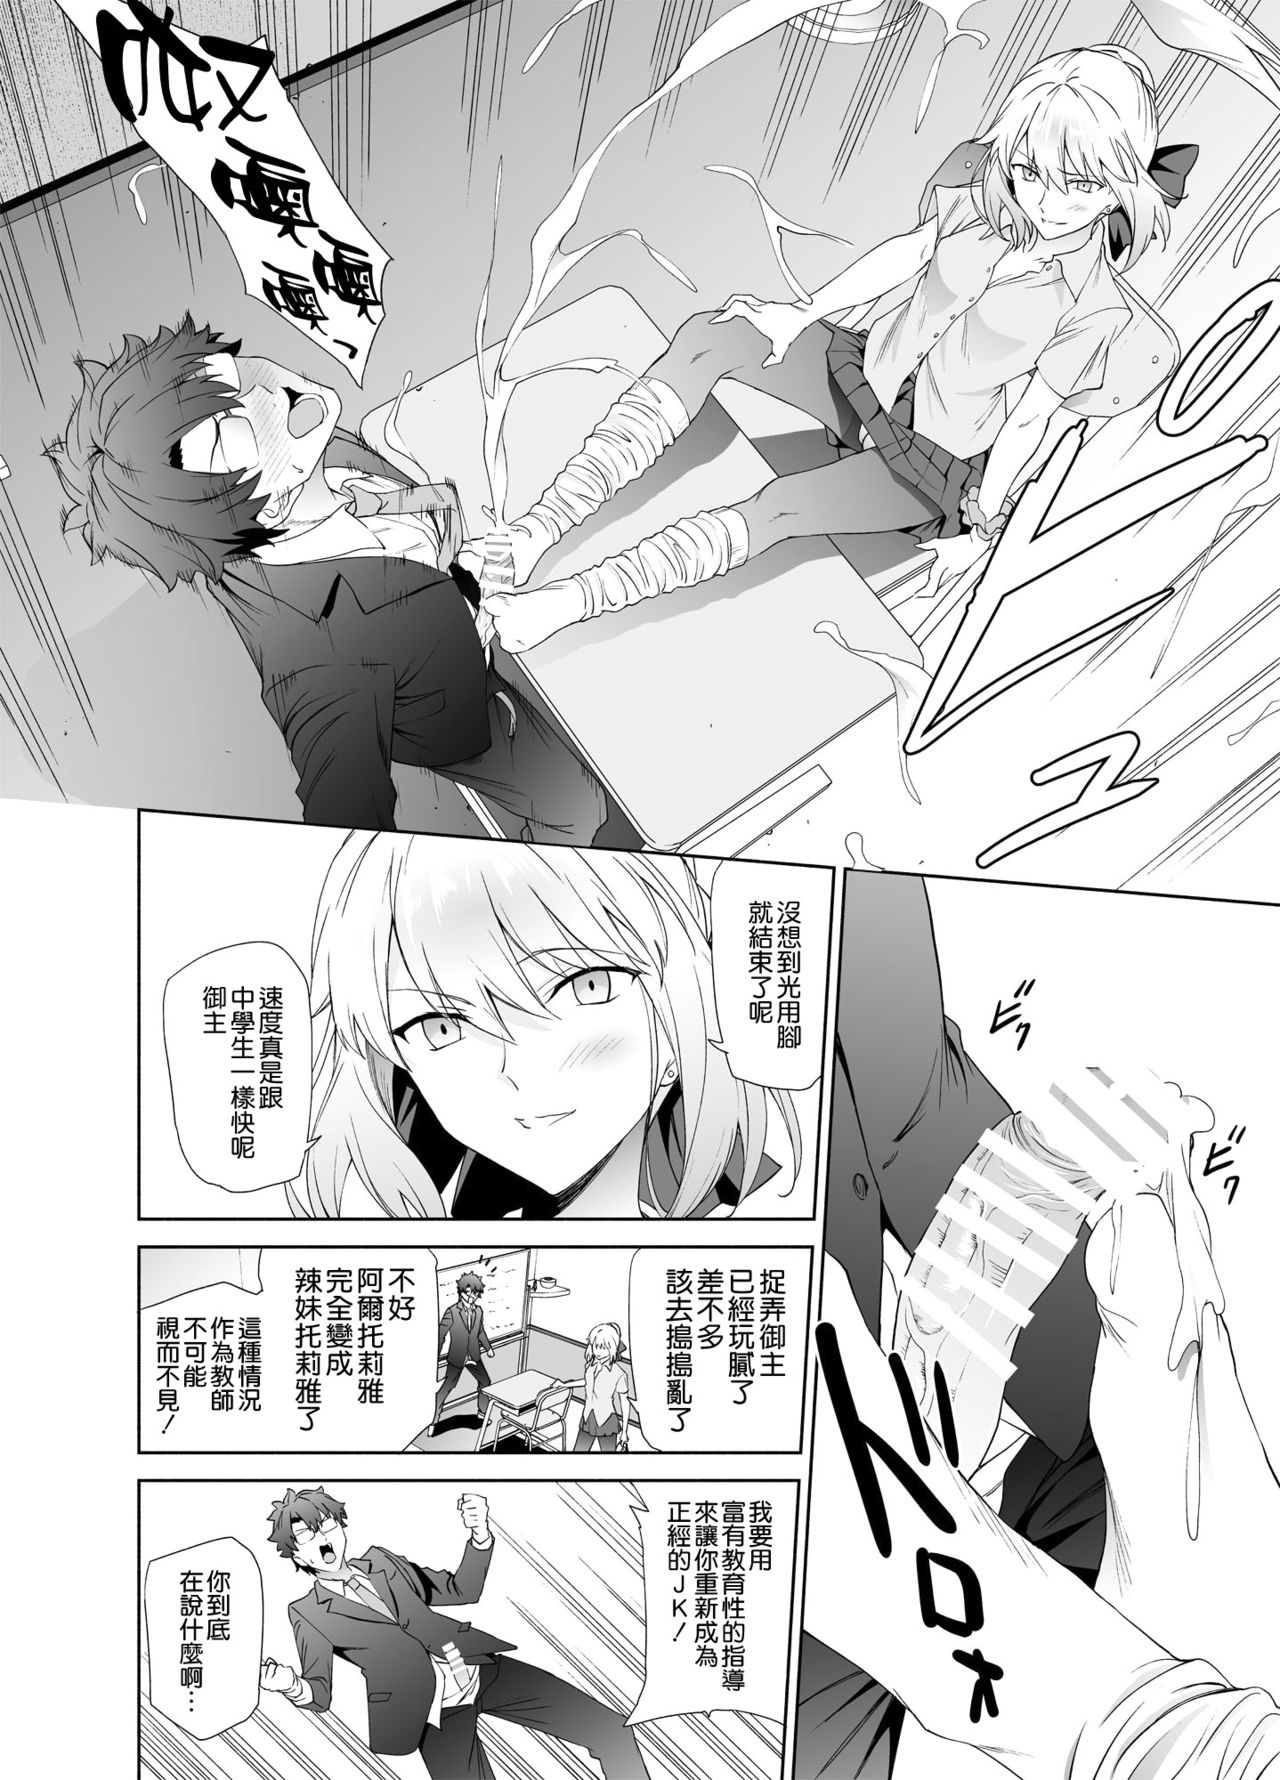 [EXTENDED PART (Endo Yoshiki)] JK Arturia [Alter] (Fate/Grand Order) [Chinese] [空気系☆漢化] [Digital] page 8 full